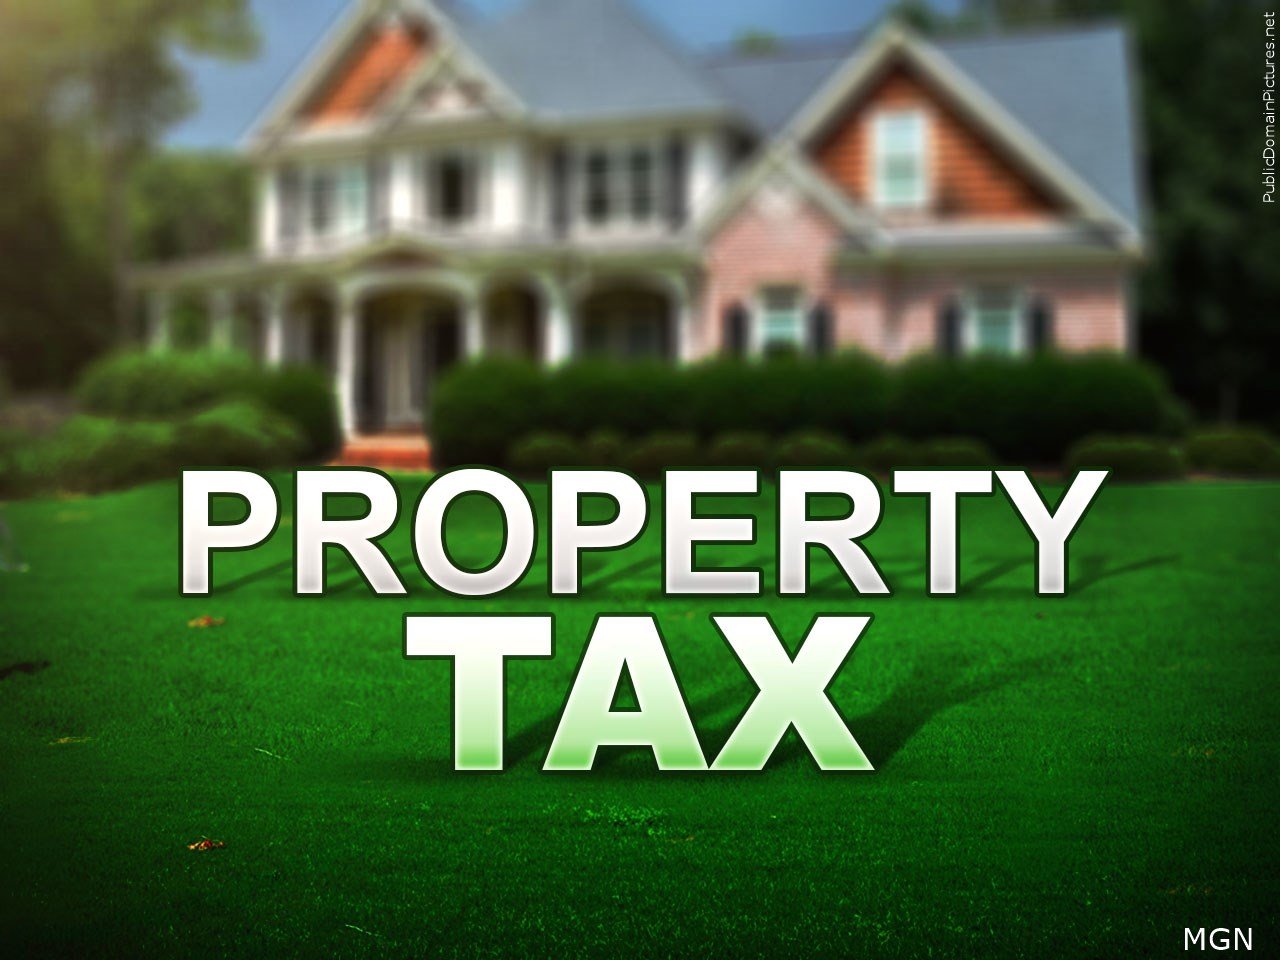 Pay property tax in Jackson or Madison Co.? We want to hear from you